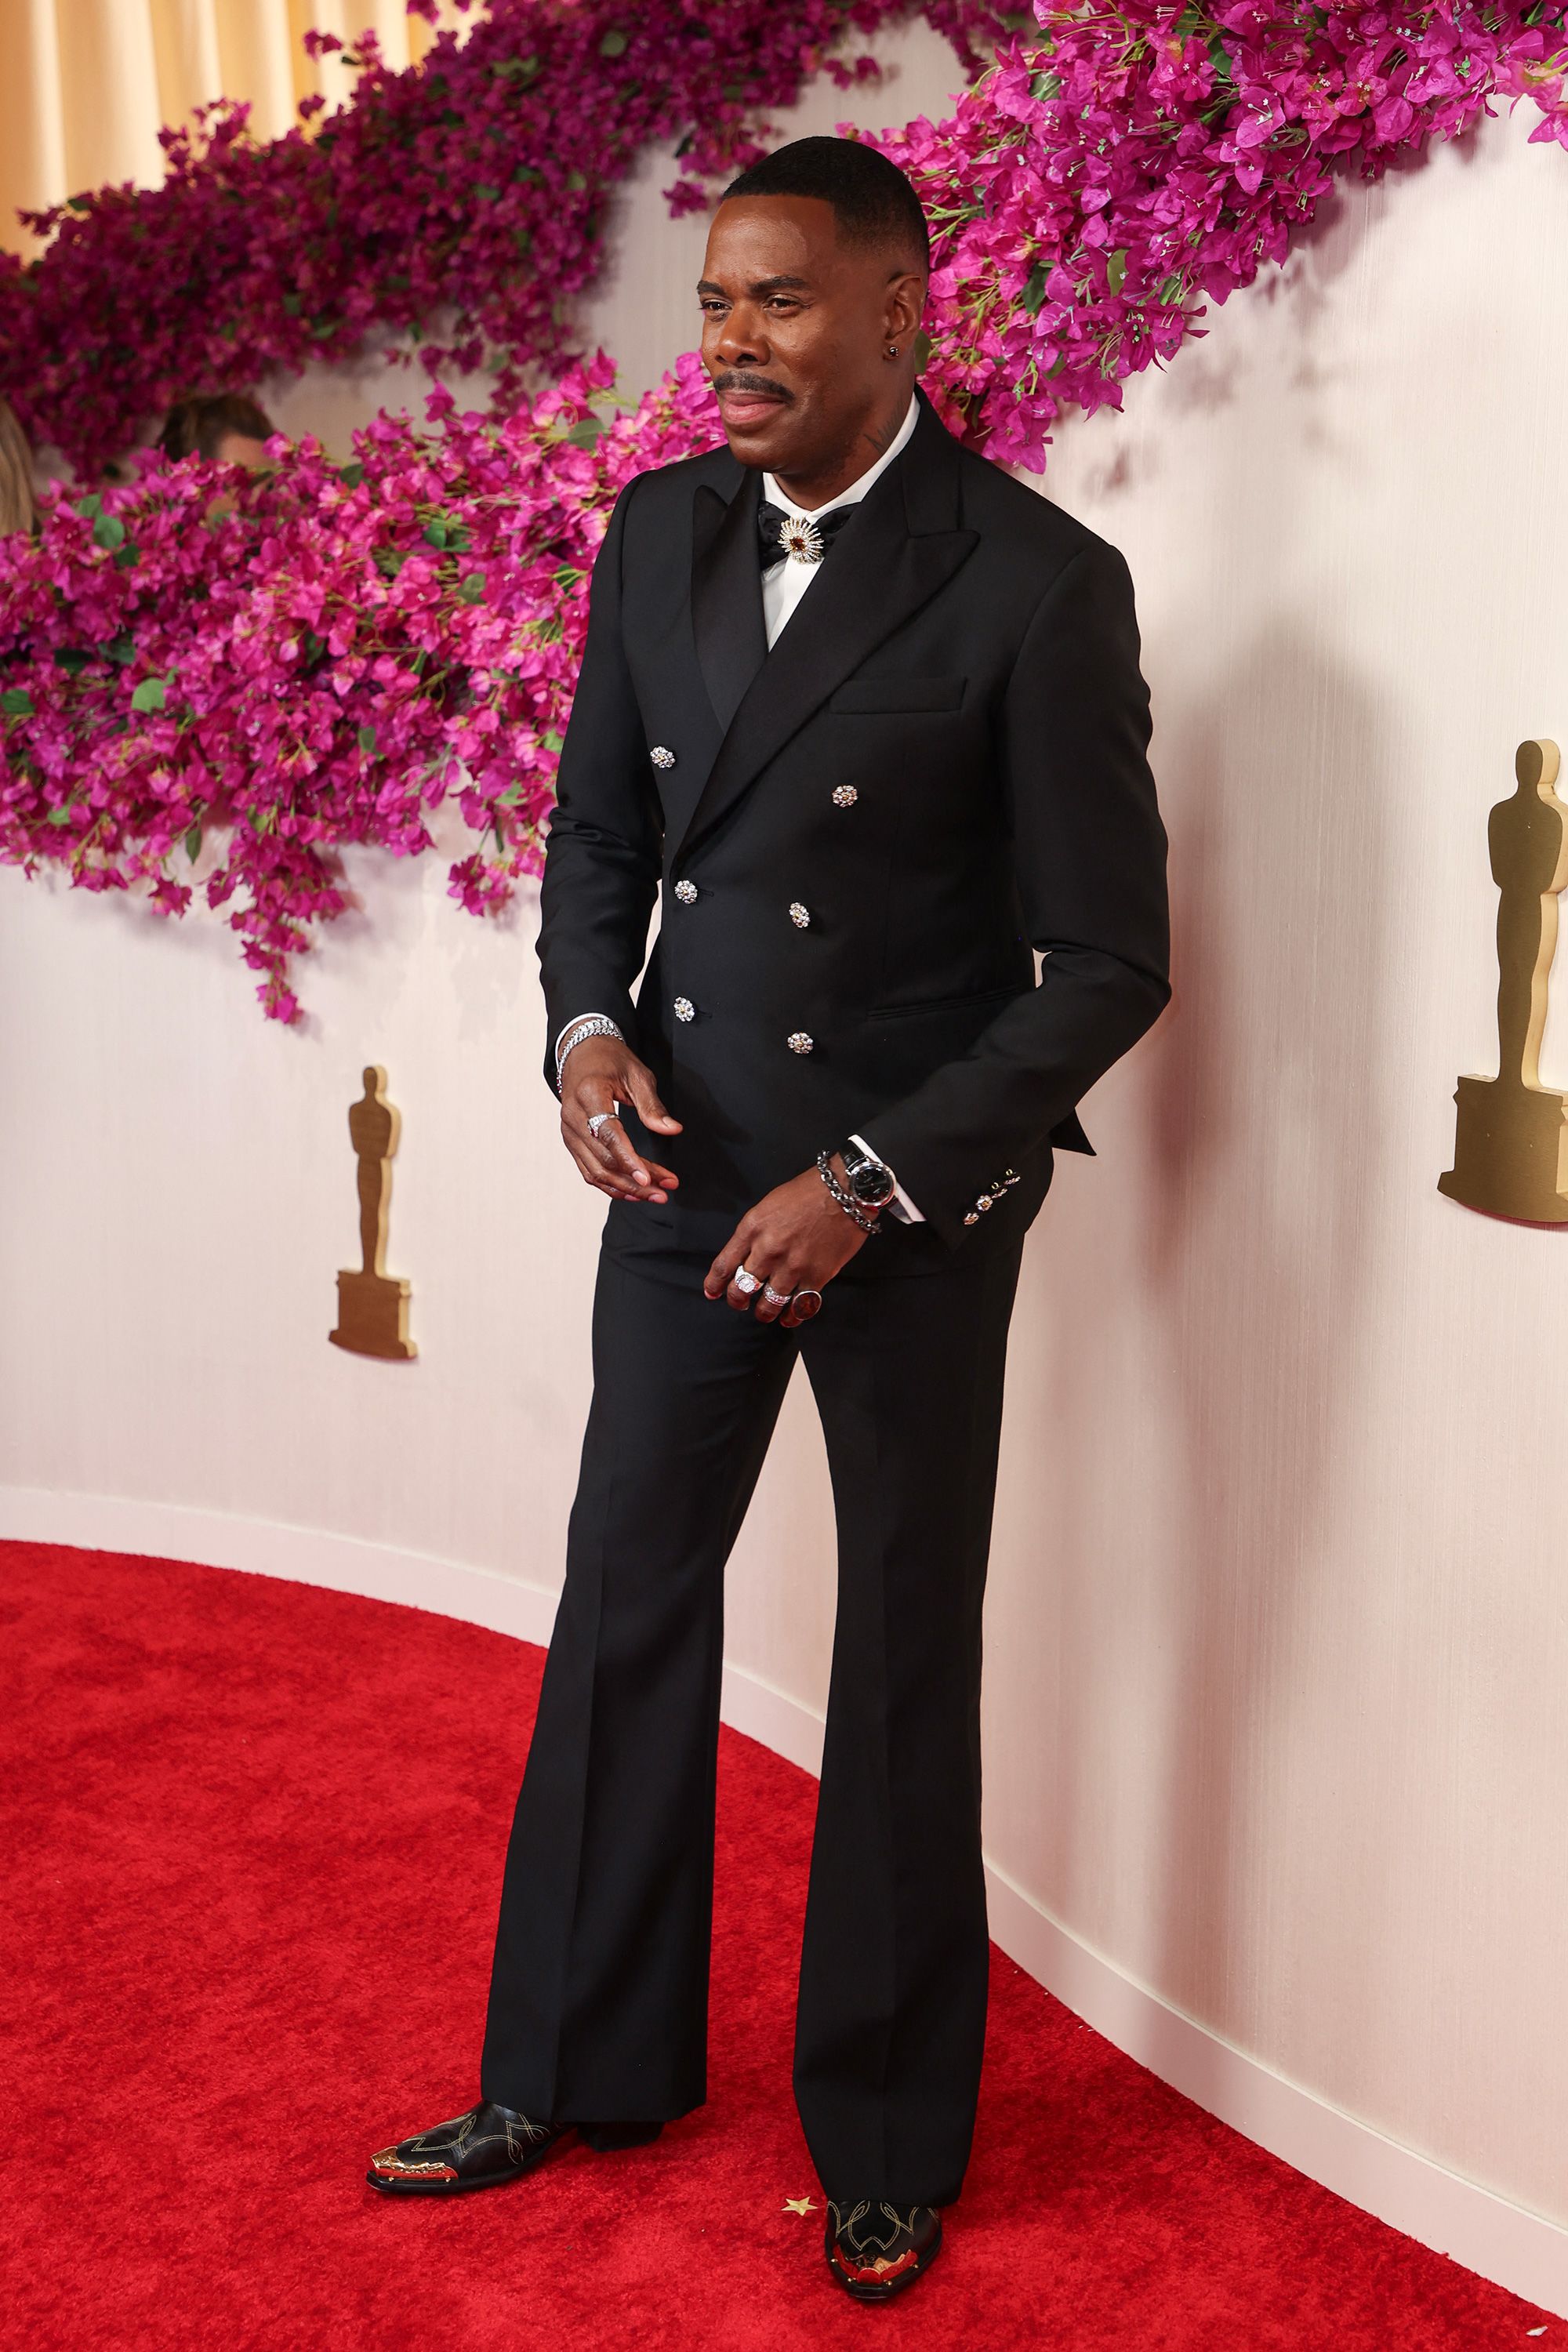 Best Actor nominee Colman Domingo wore a black Louis Vuitton double breasted suit with statement bowtie and jewelry by David Yurman. "I wanted to just shine like a diamond," he told Laverne Cox during E’s red carpet coverage.